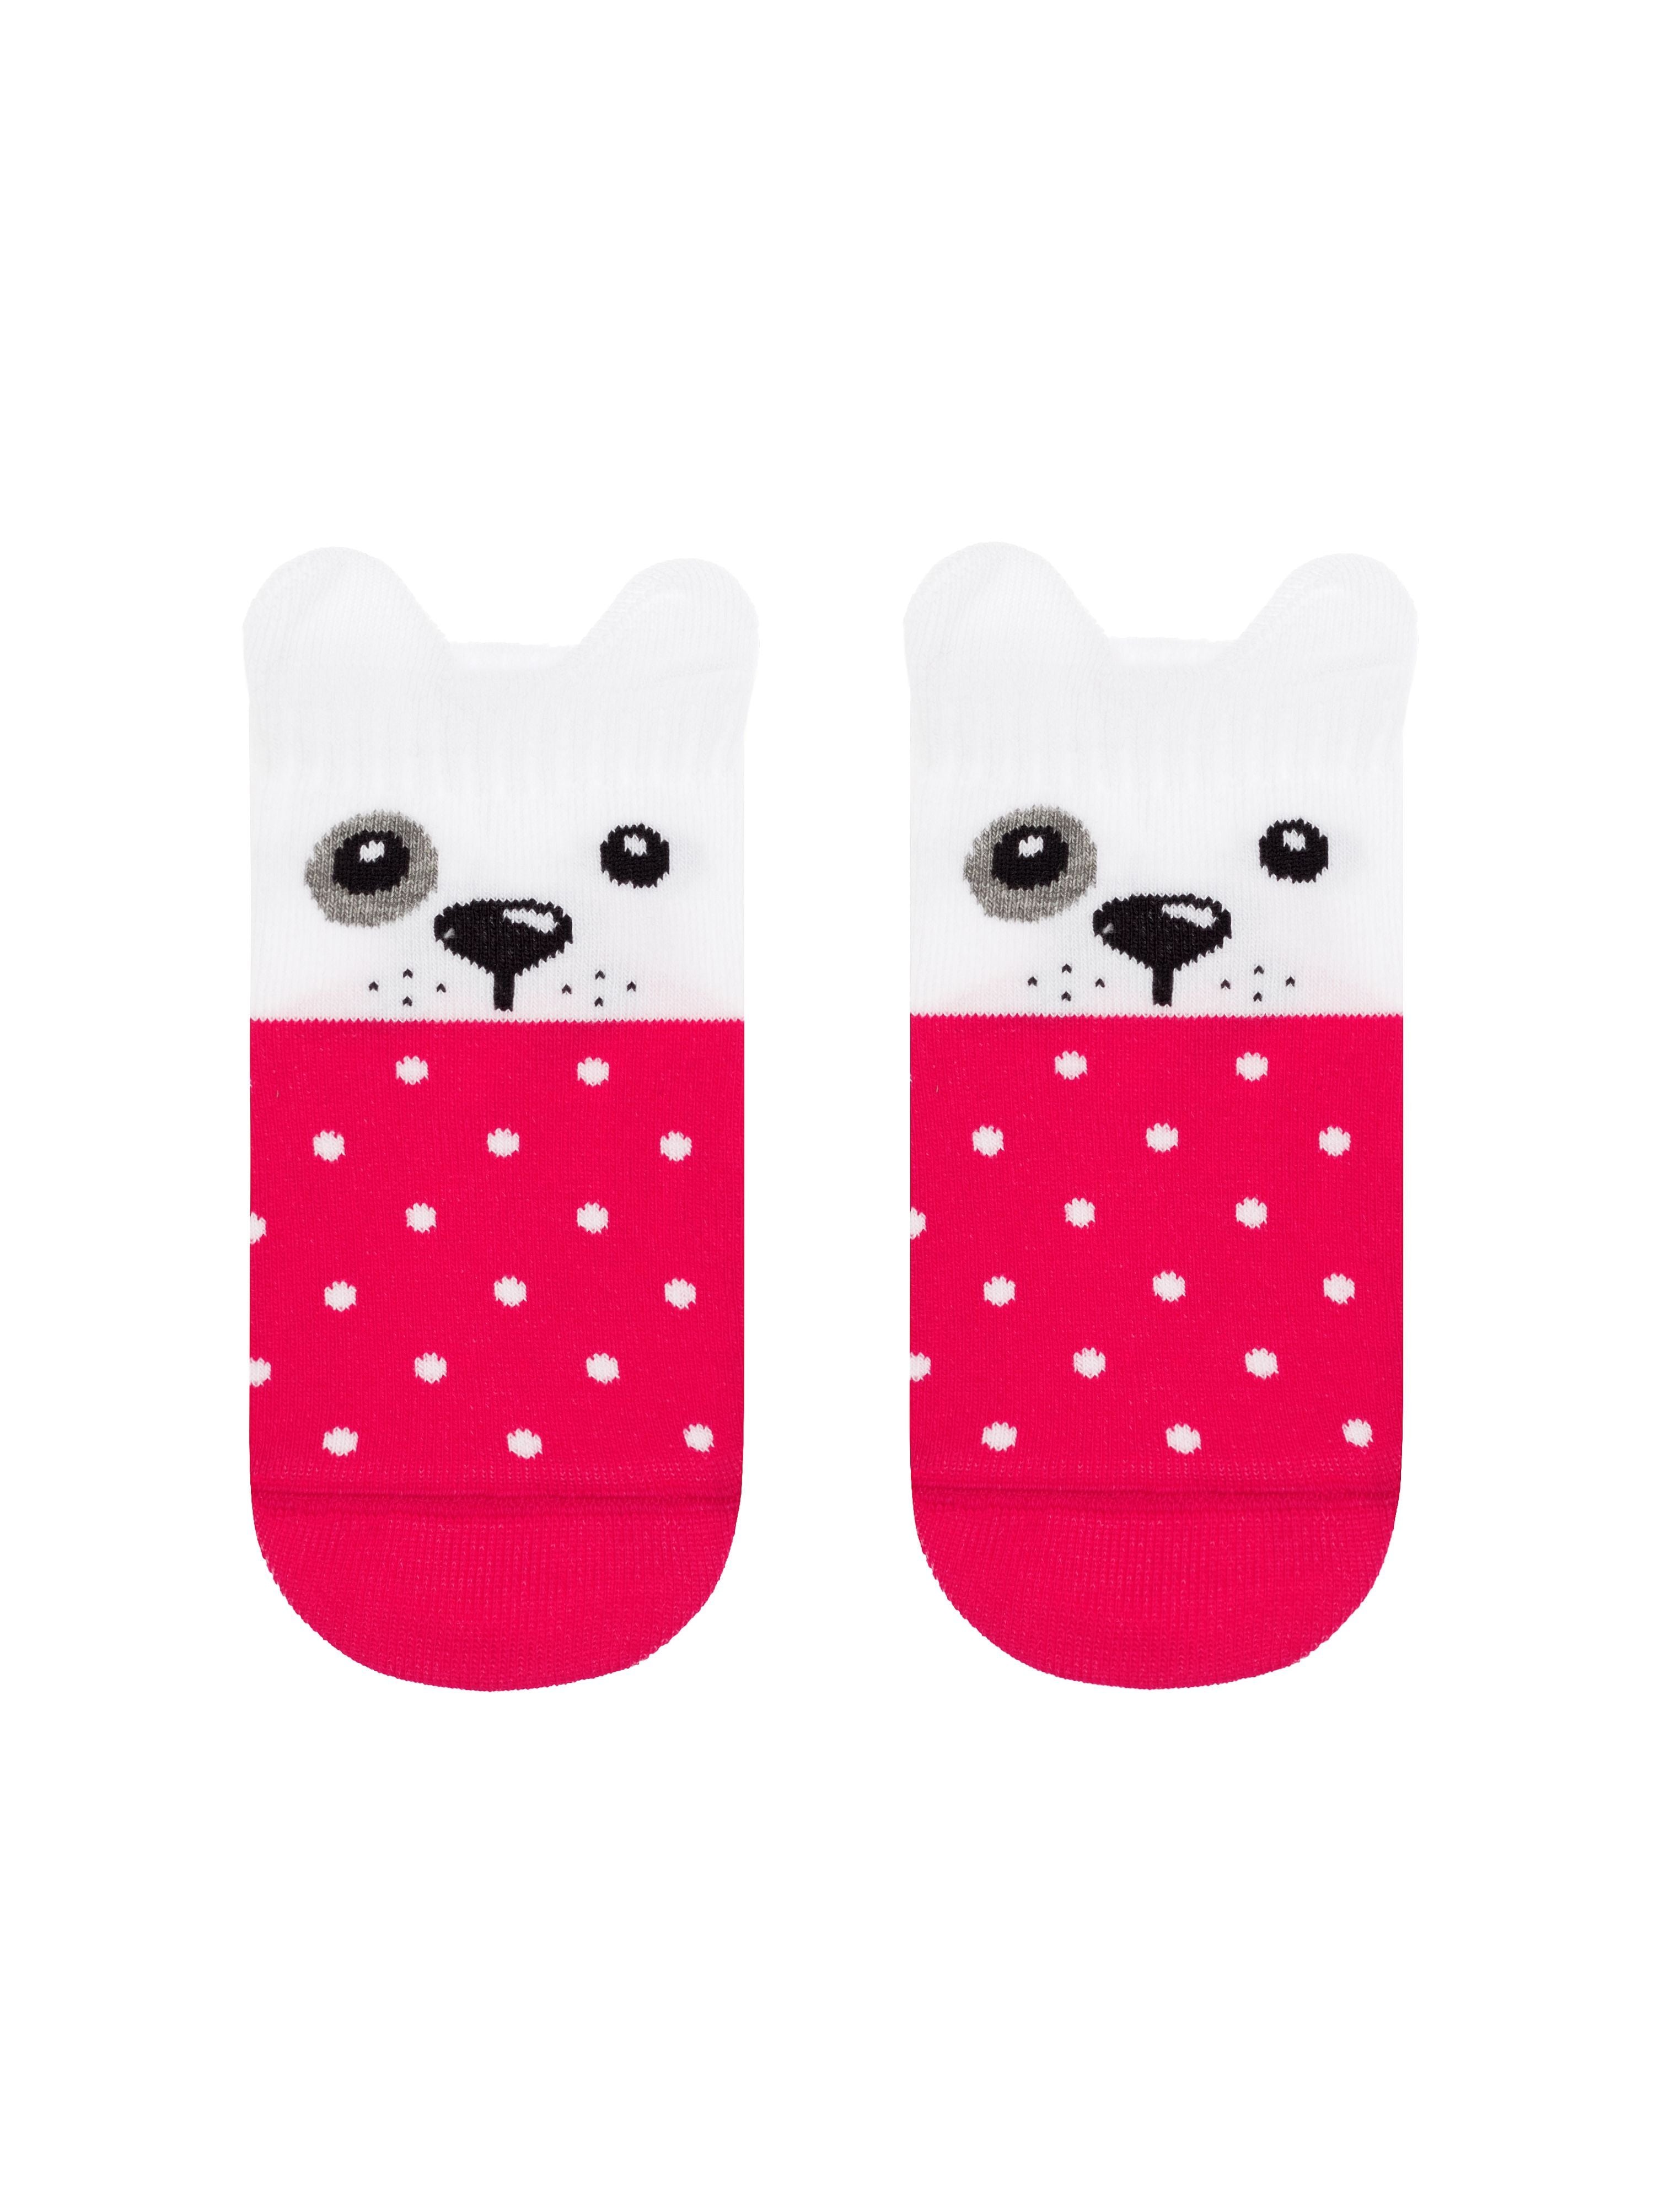 Cute baby socks white and pink color by Conte-Kids